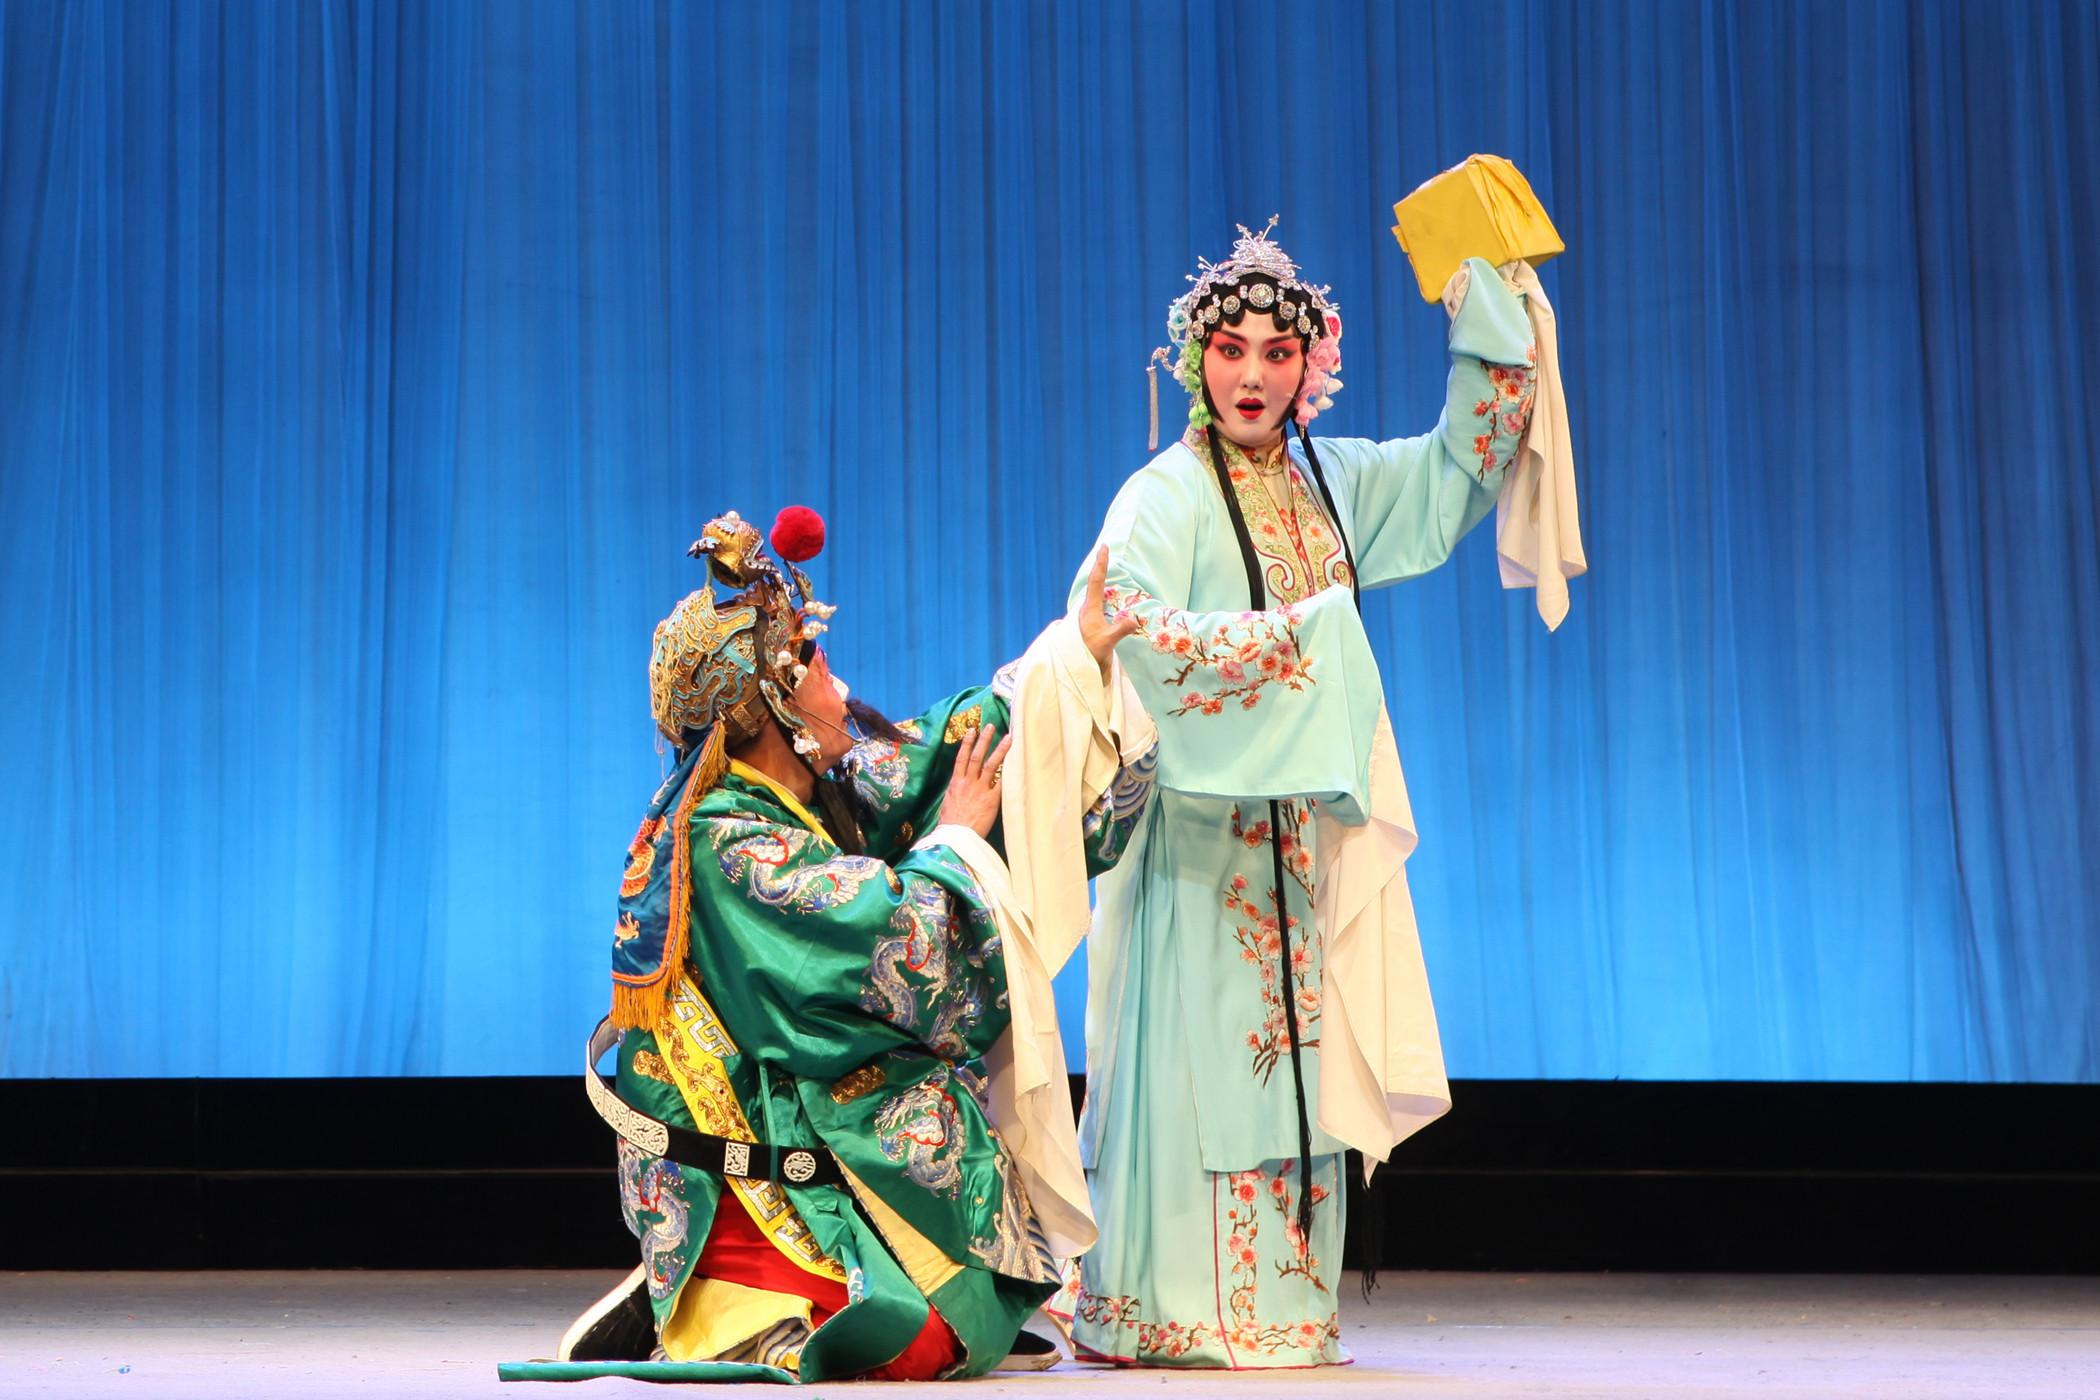 The Wuhan Han Opera Theatre, upon the invitation of the Leisure and Cultural Services Department, will make its debut at this year's Chinese Opera Festival in July. Photo shows a scene from "Admonition by Suicide".